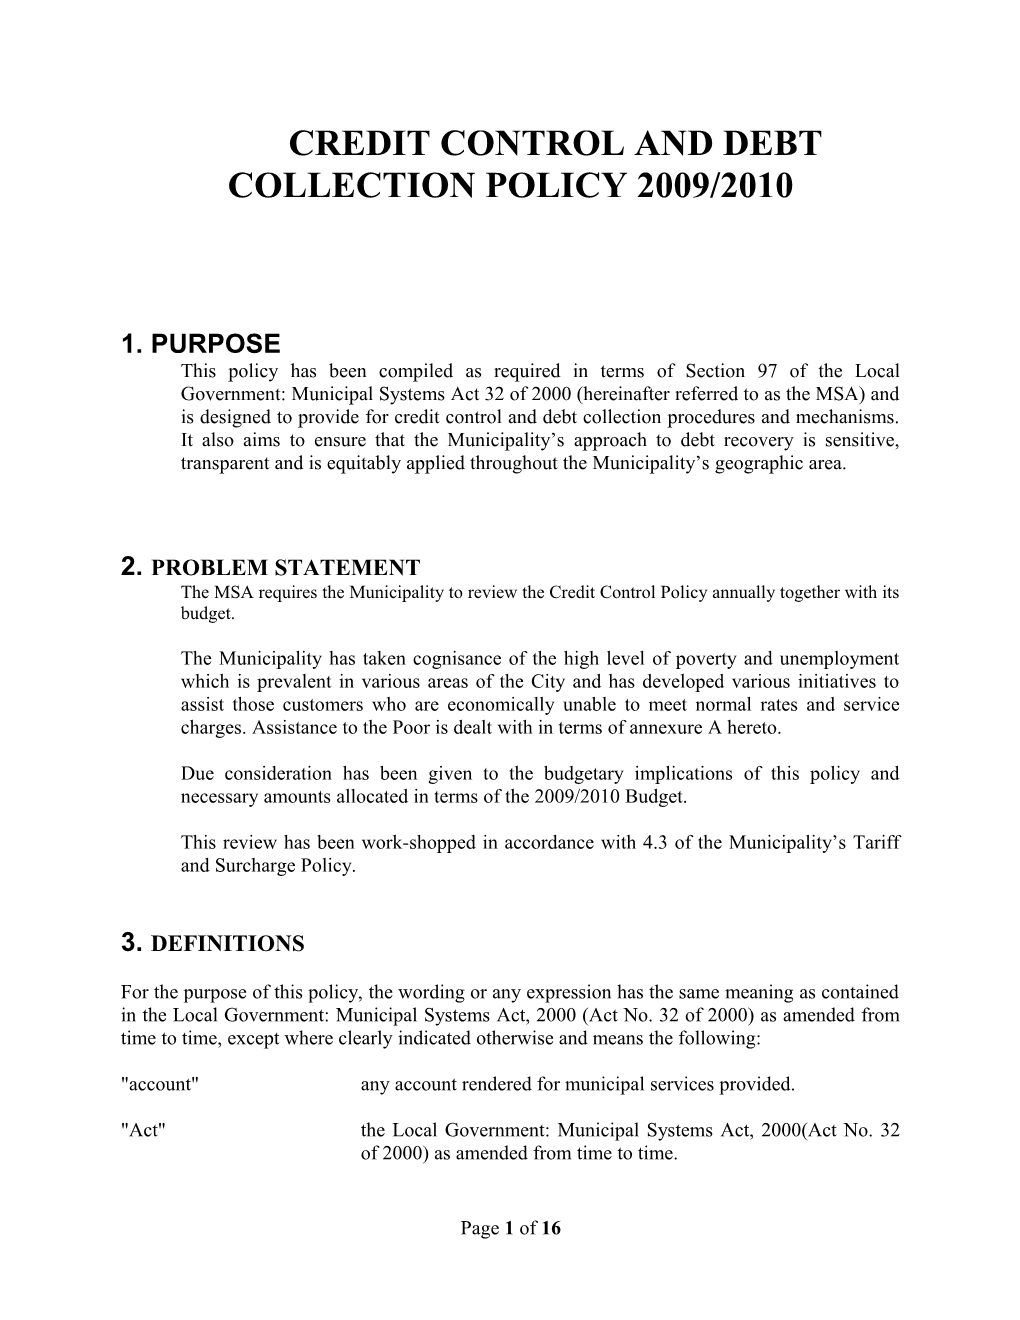 Credit Control and Debt Collection Policy 2009/2010